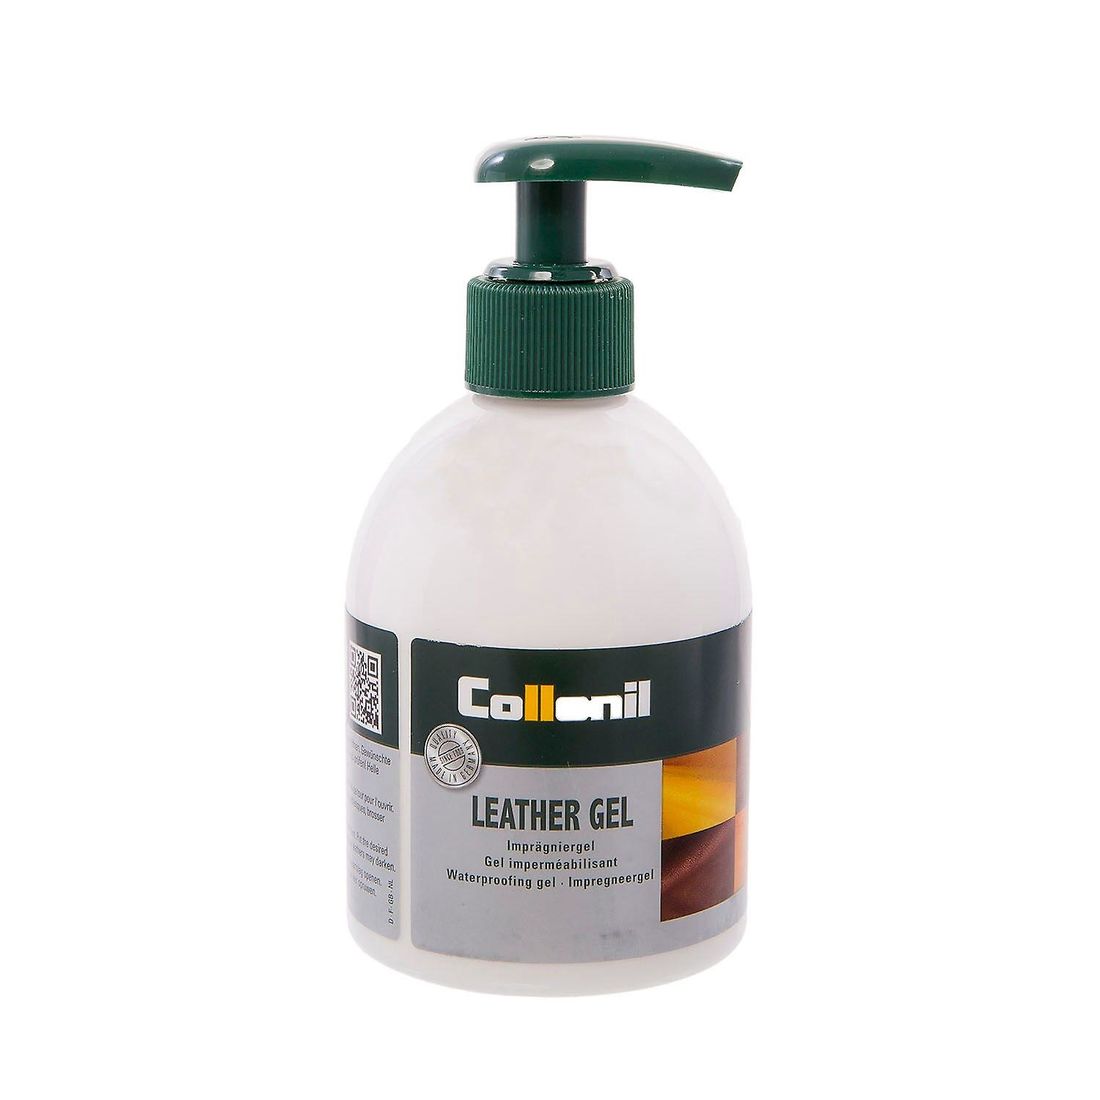 Collonil Leather Gel Waterproofs & Preserves Suede Leather and Synthetics 230ml